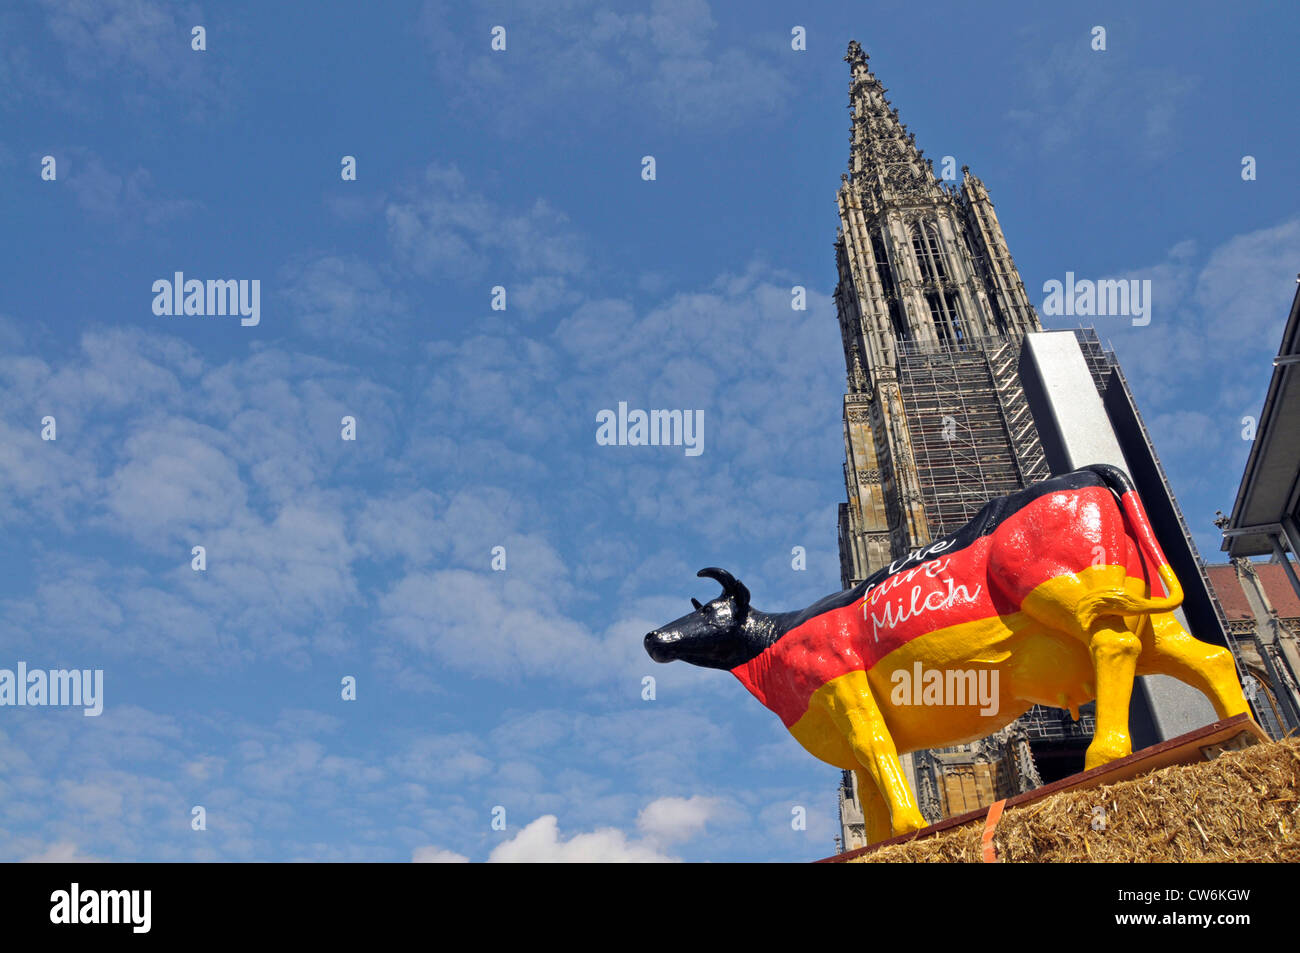 protest of dairy farmers with a artifical cow for higher milk prices, Ulmer Munster, Ulm cathedral, in the background, Germany, Baden-Wuerttemberg, Ulm Stock Photo